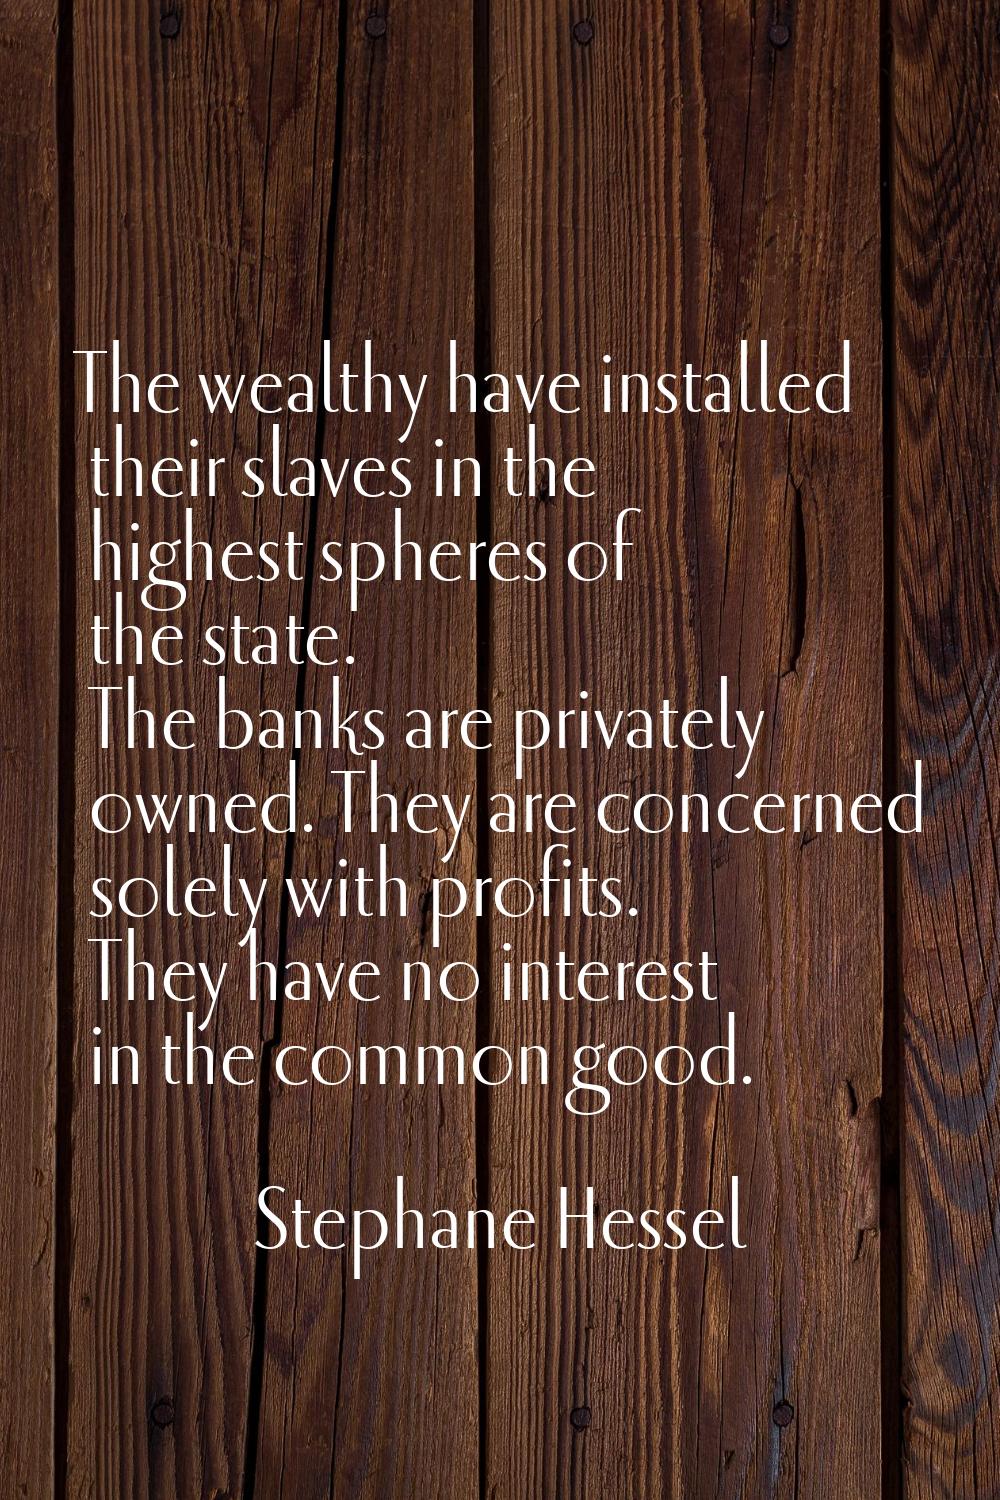 The wealthy have installed their slaves in the highest spheres of the state. The banks are privatel